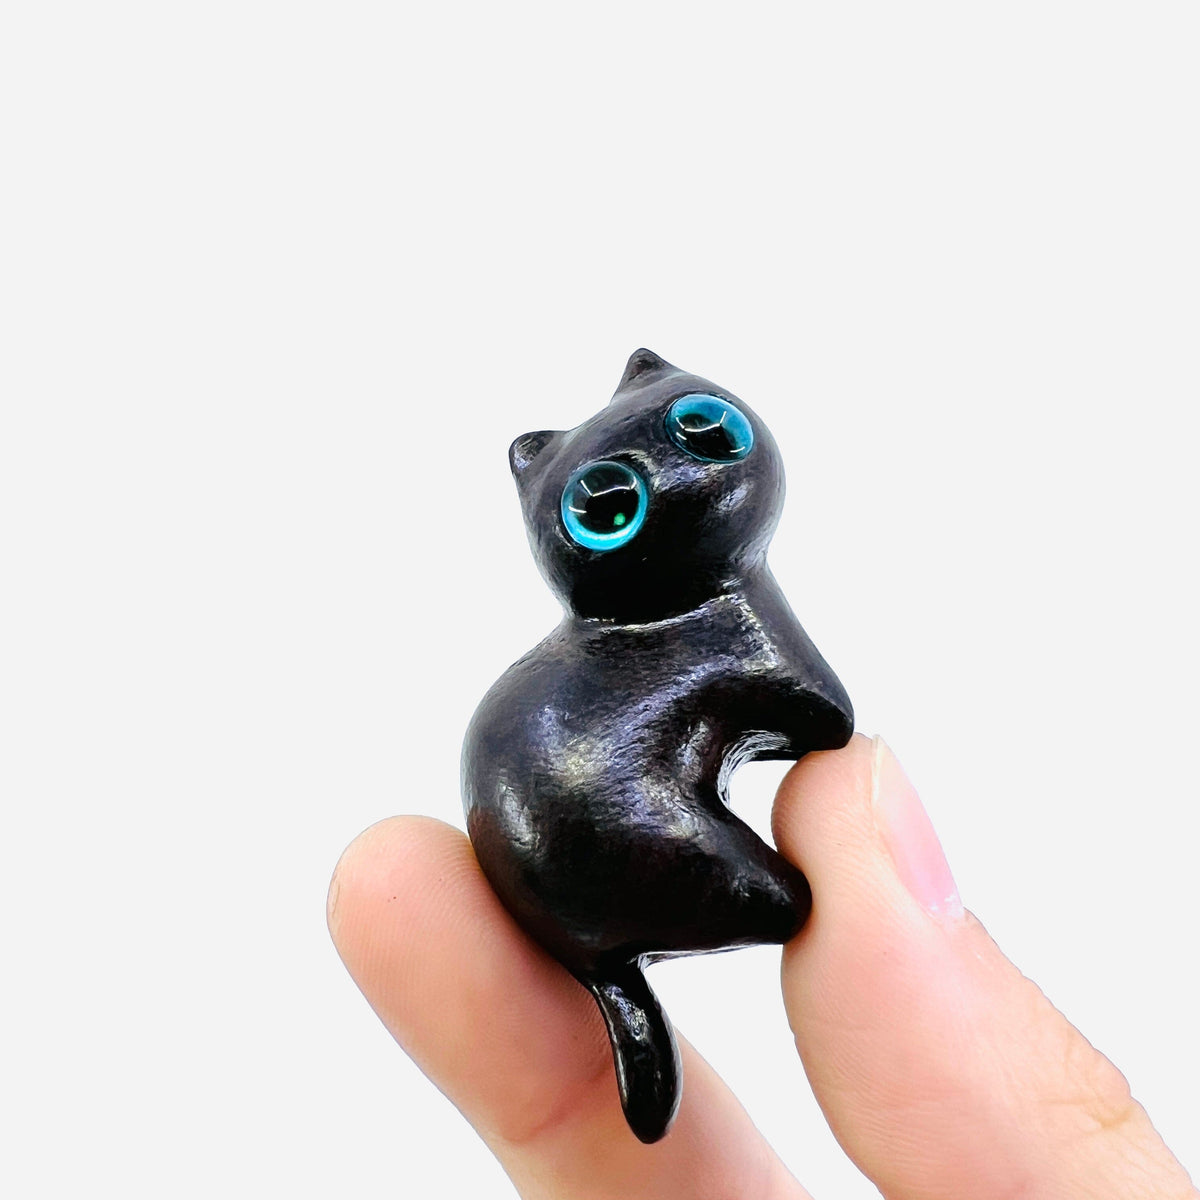 Purrfect Tiny Wooden Cat, Cuddly Miniature - Black Cat 